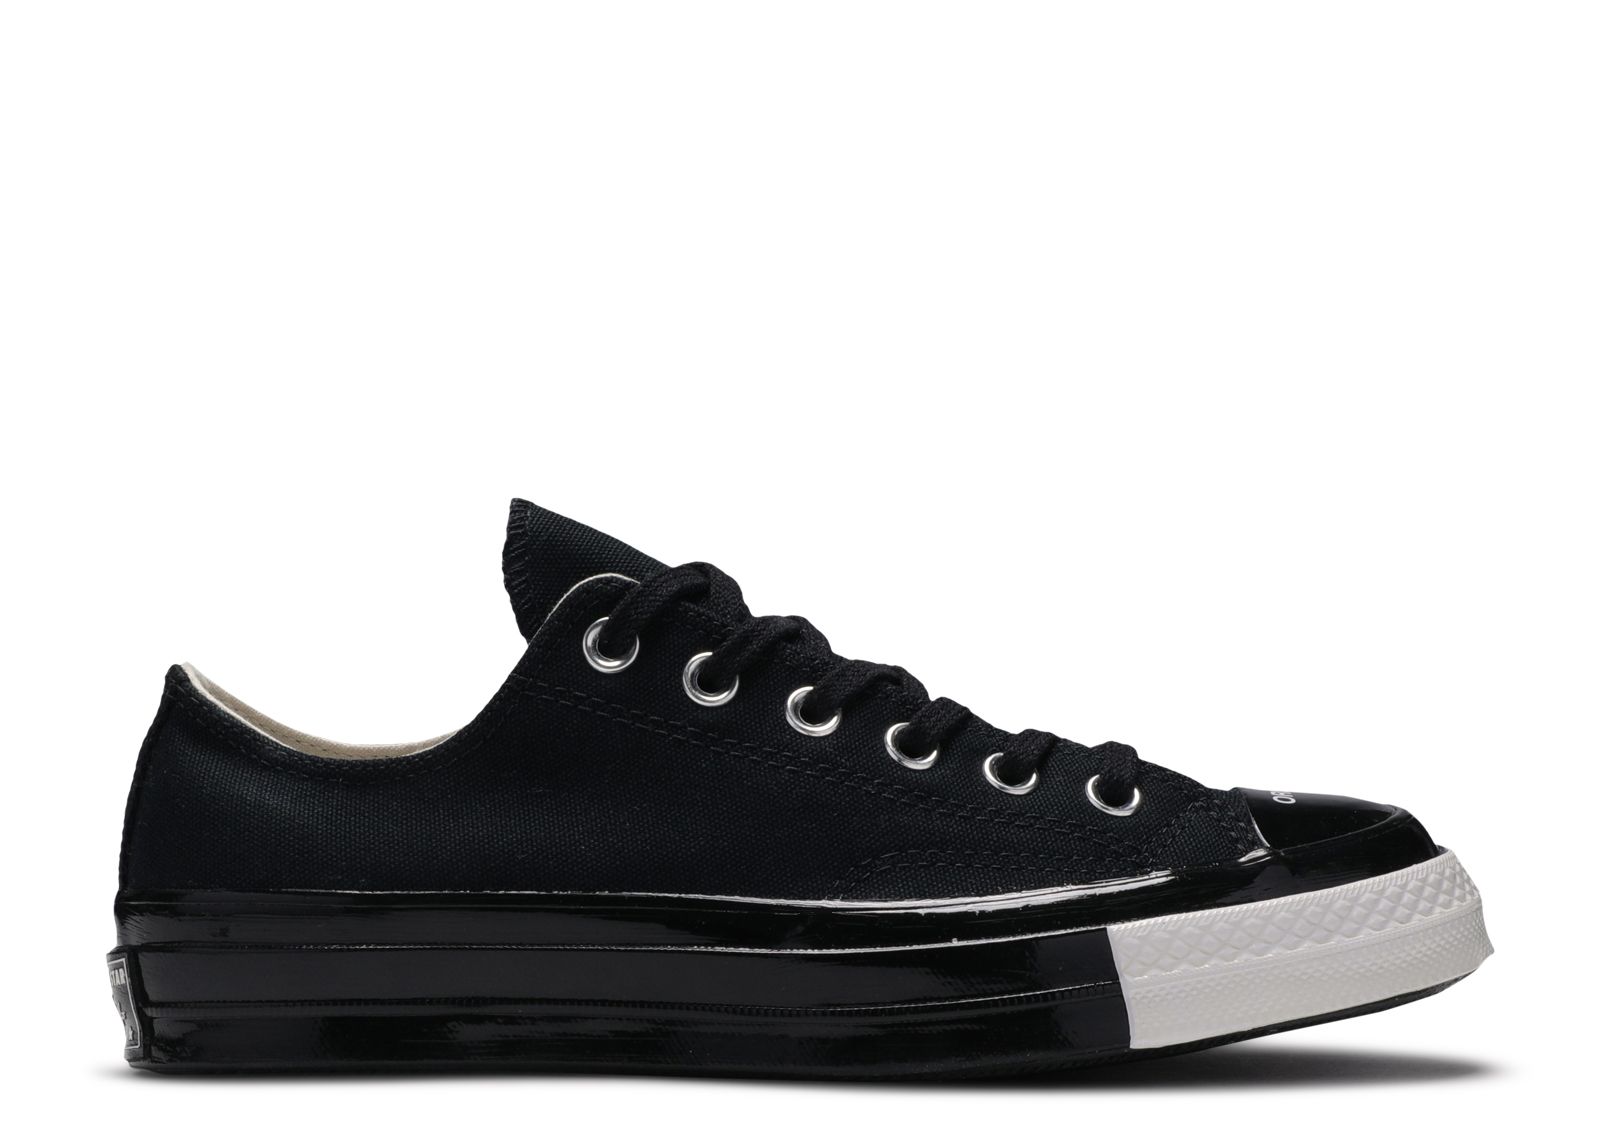 Undercover X Chuck 70 Low 'Order And Disorder' - Converse - 163010C ...